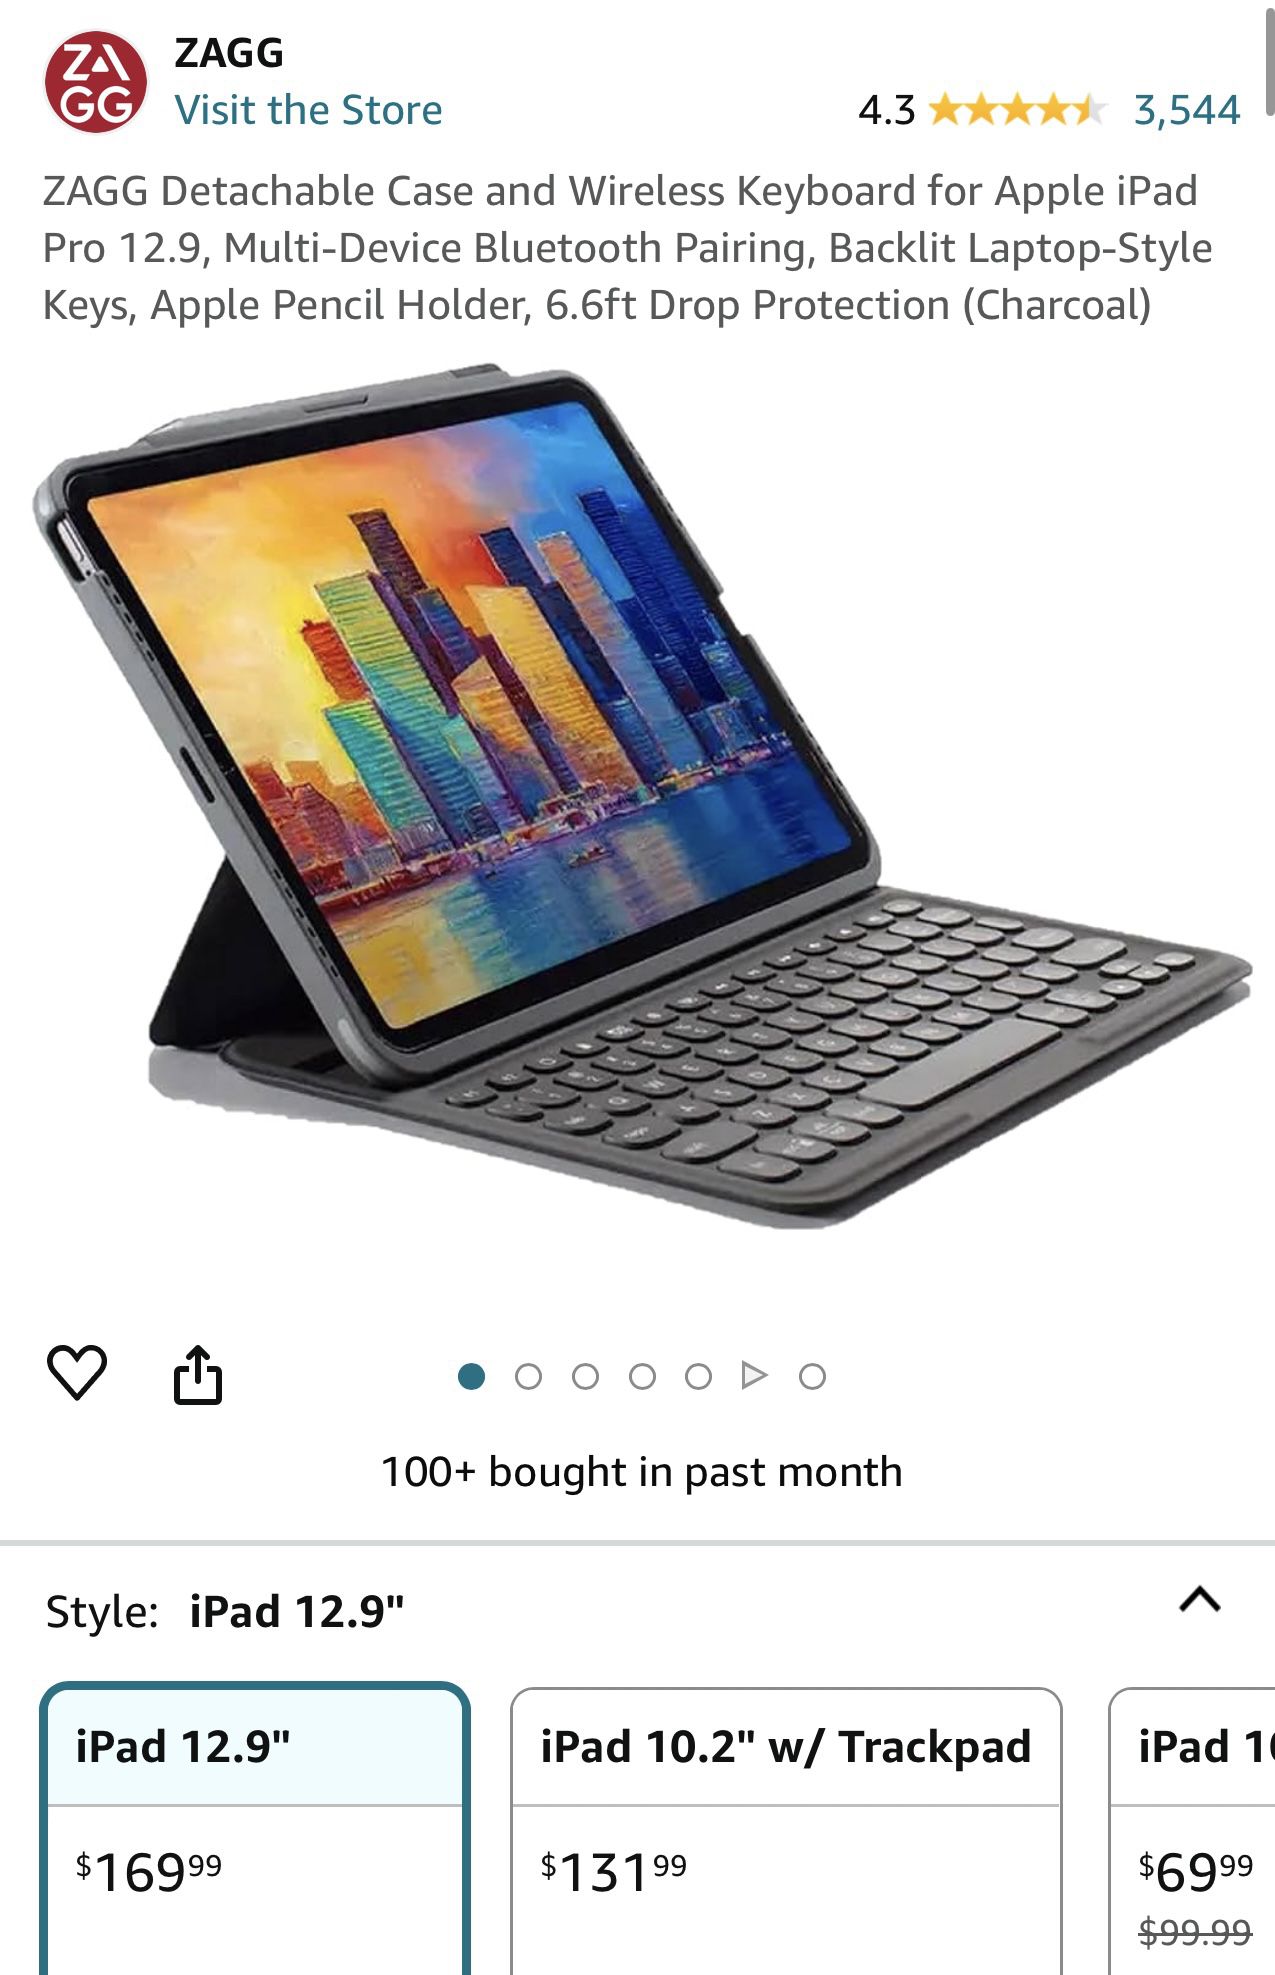 ZAGG Detachable Case and Wireless Keyboard for Apple iPad Pro 12.9